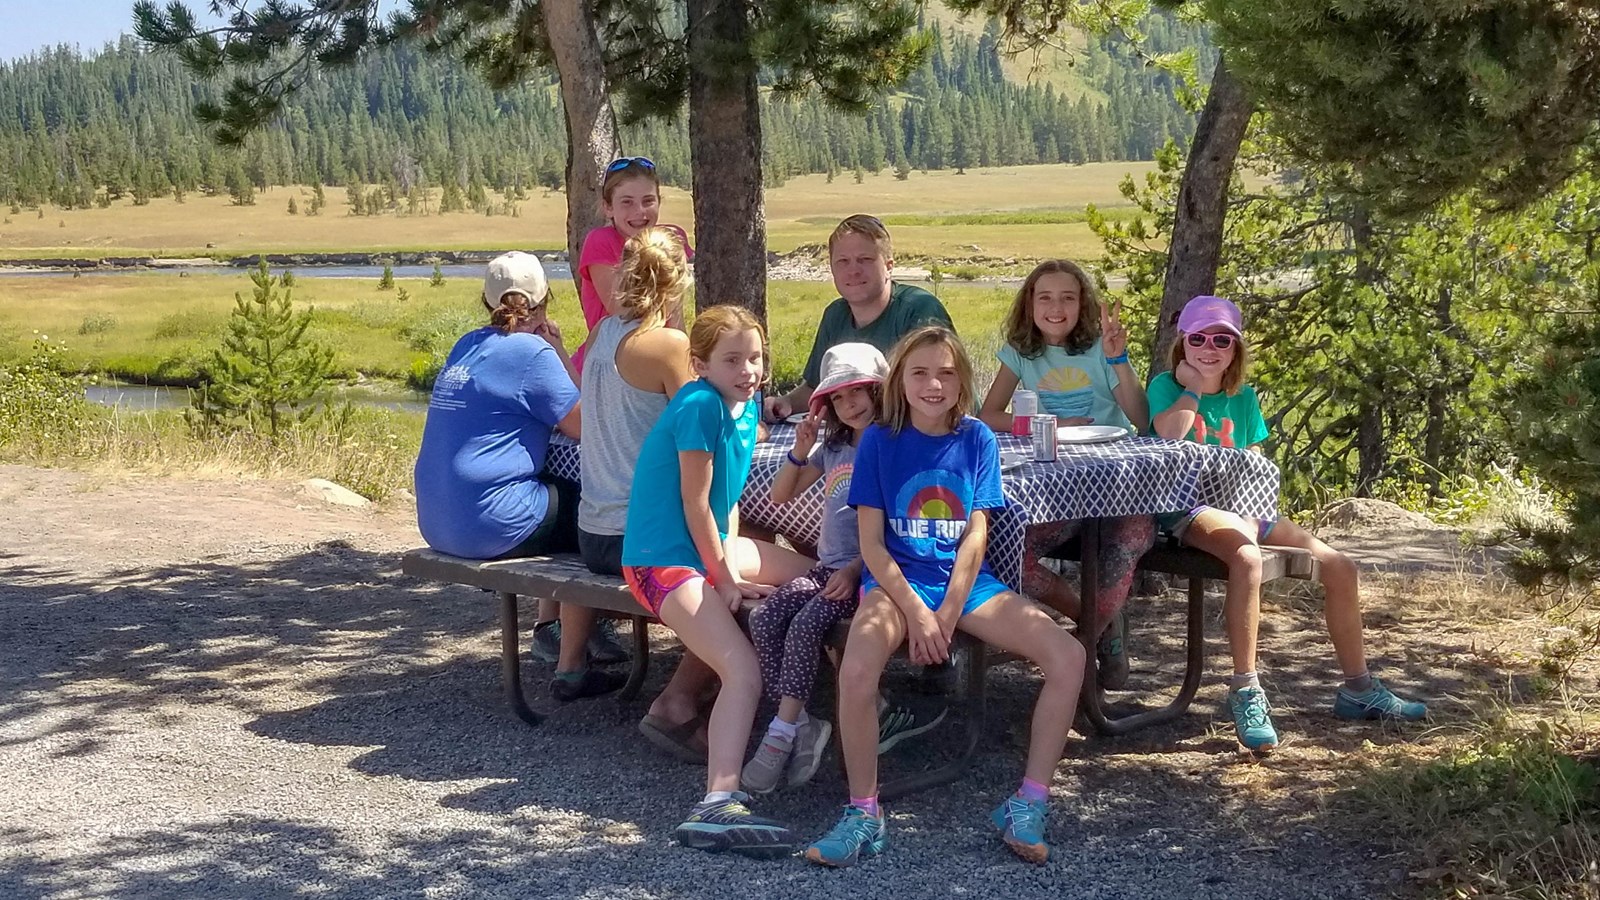 A large group of people sit at a picnic table in front of trees and a river running through a meadow